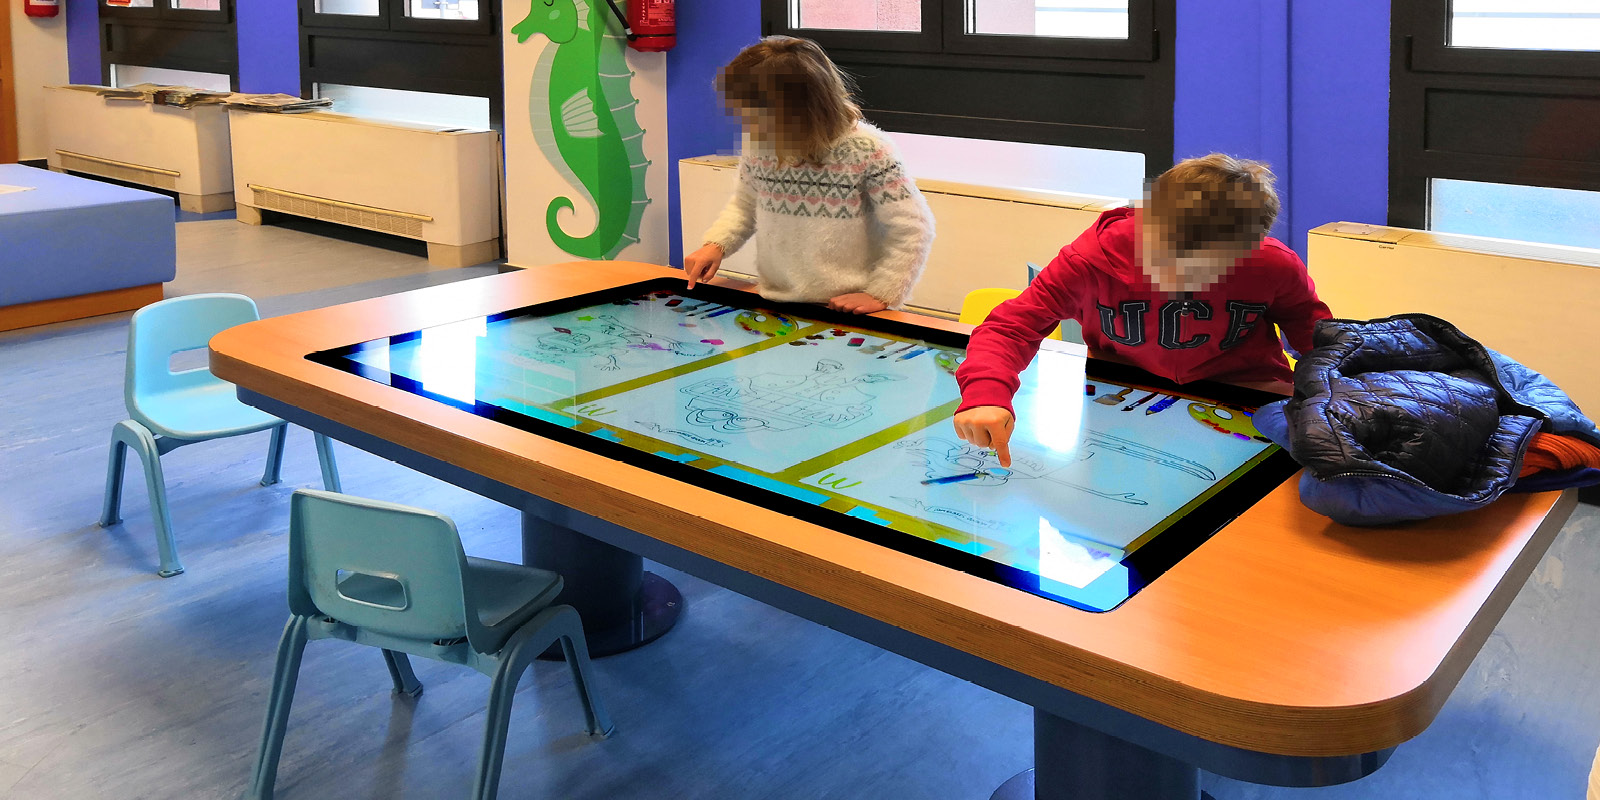 Touchwindow - A child-friendly environment